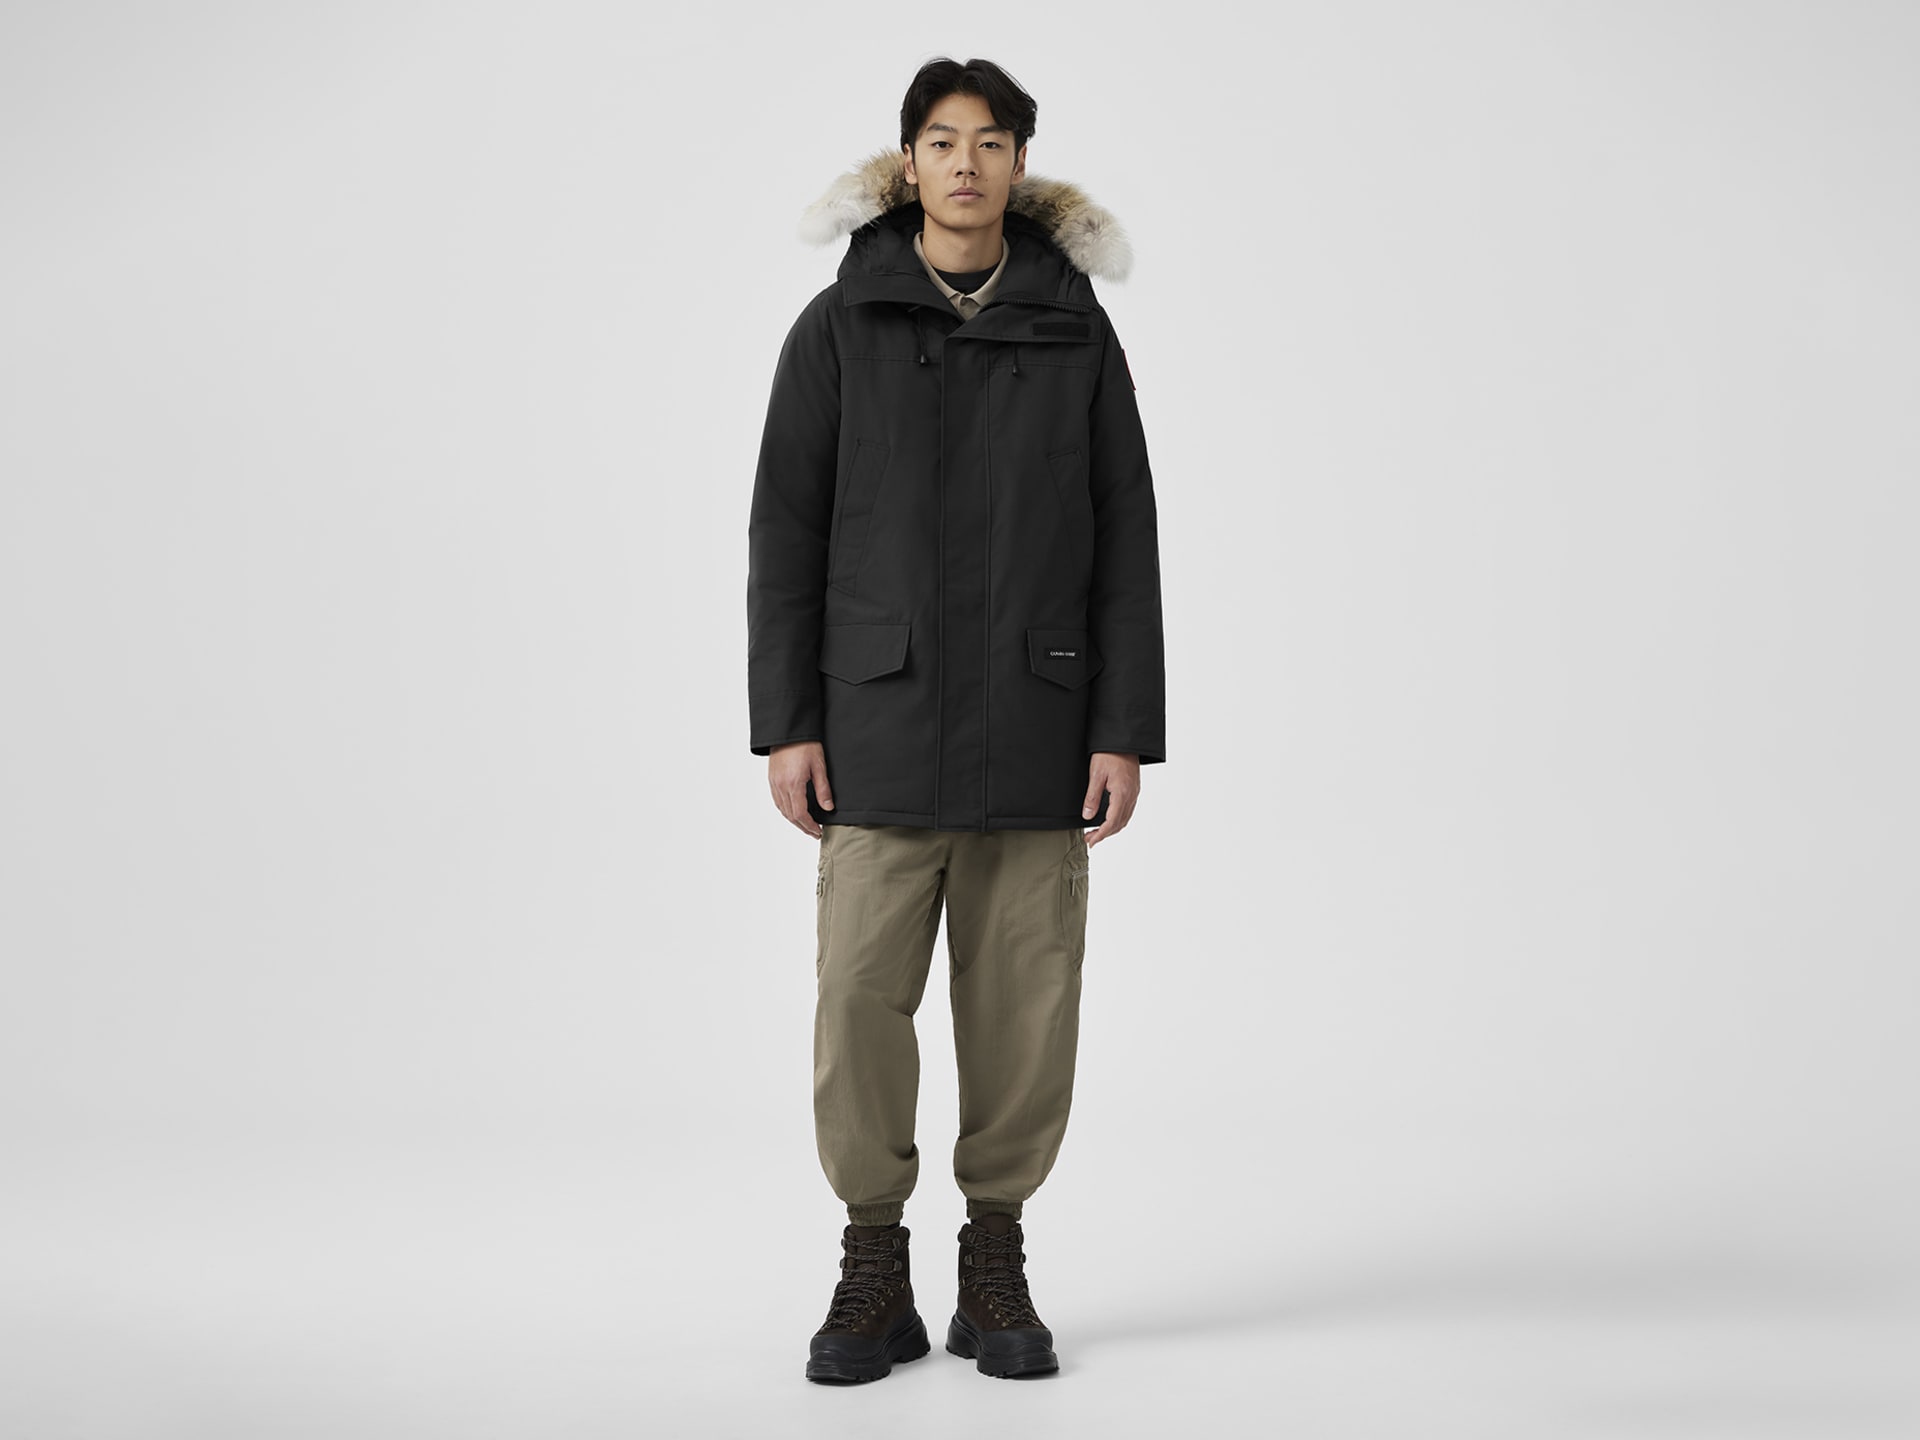 Unlock Wilderness' choice in the L.L. Bean Vs Canada Goose comparison, the Langford Parka Heritage by Canada Goose